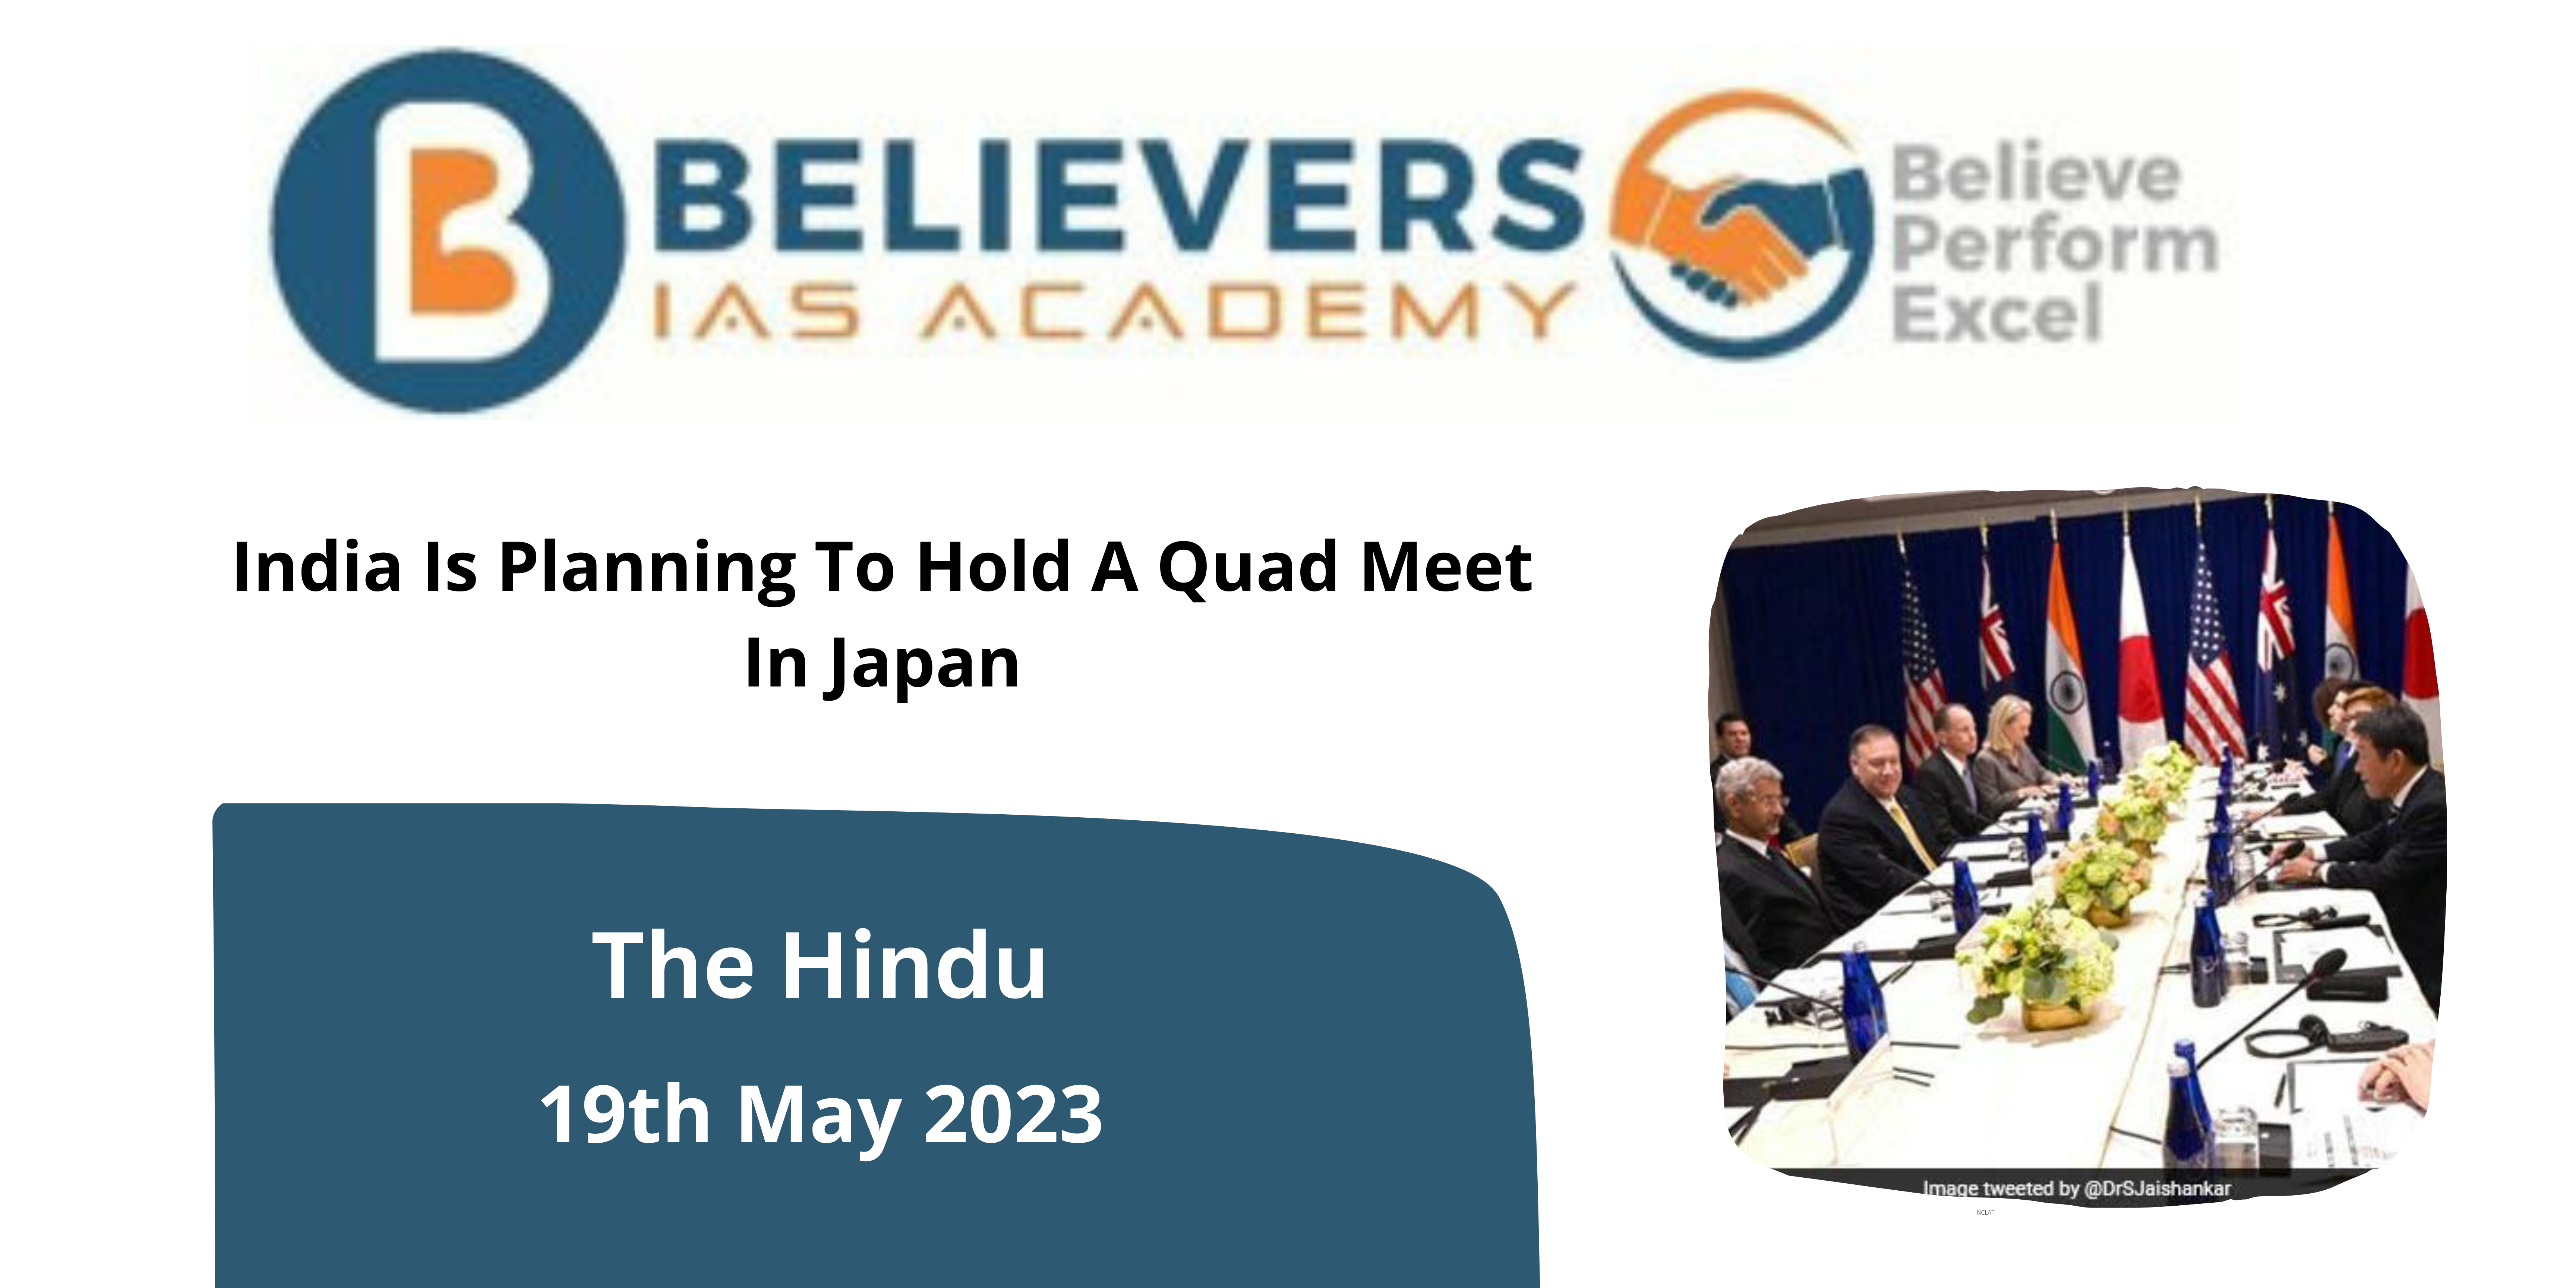 India Is Planning To Hold A Quad Meet In Japan